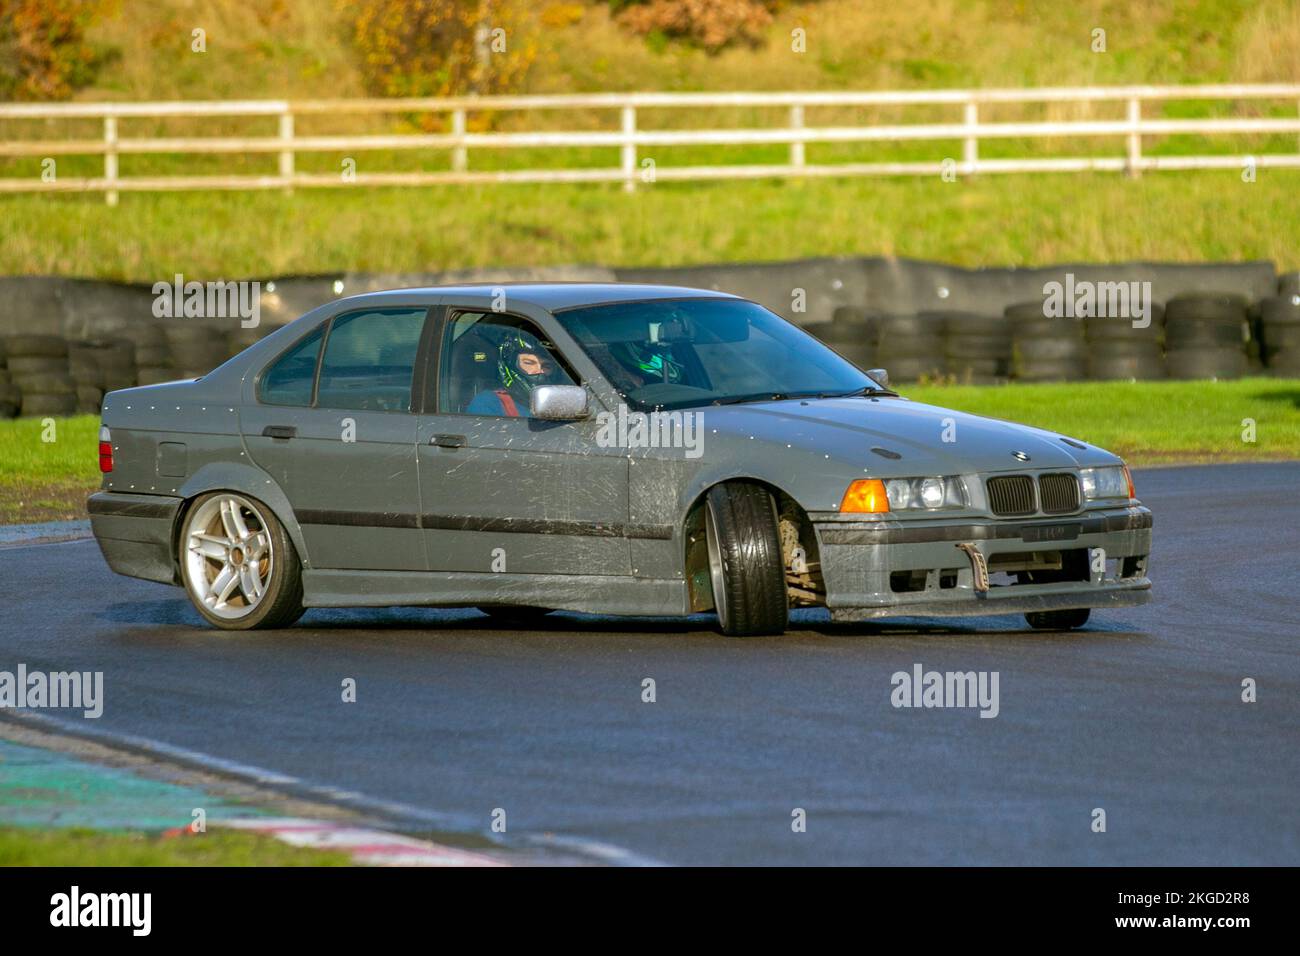 BMW Rear-wheel-drive car, driving on drift tracks and high-speed cornering on wet roads on a Three Sisters Drift Day in Wigan, UK Stock Photo